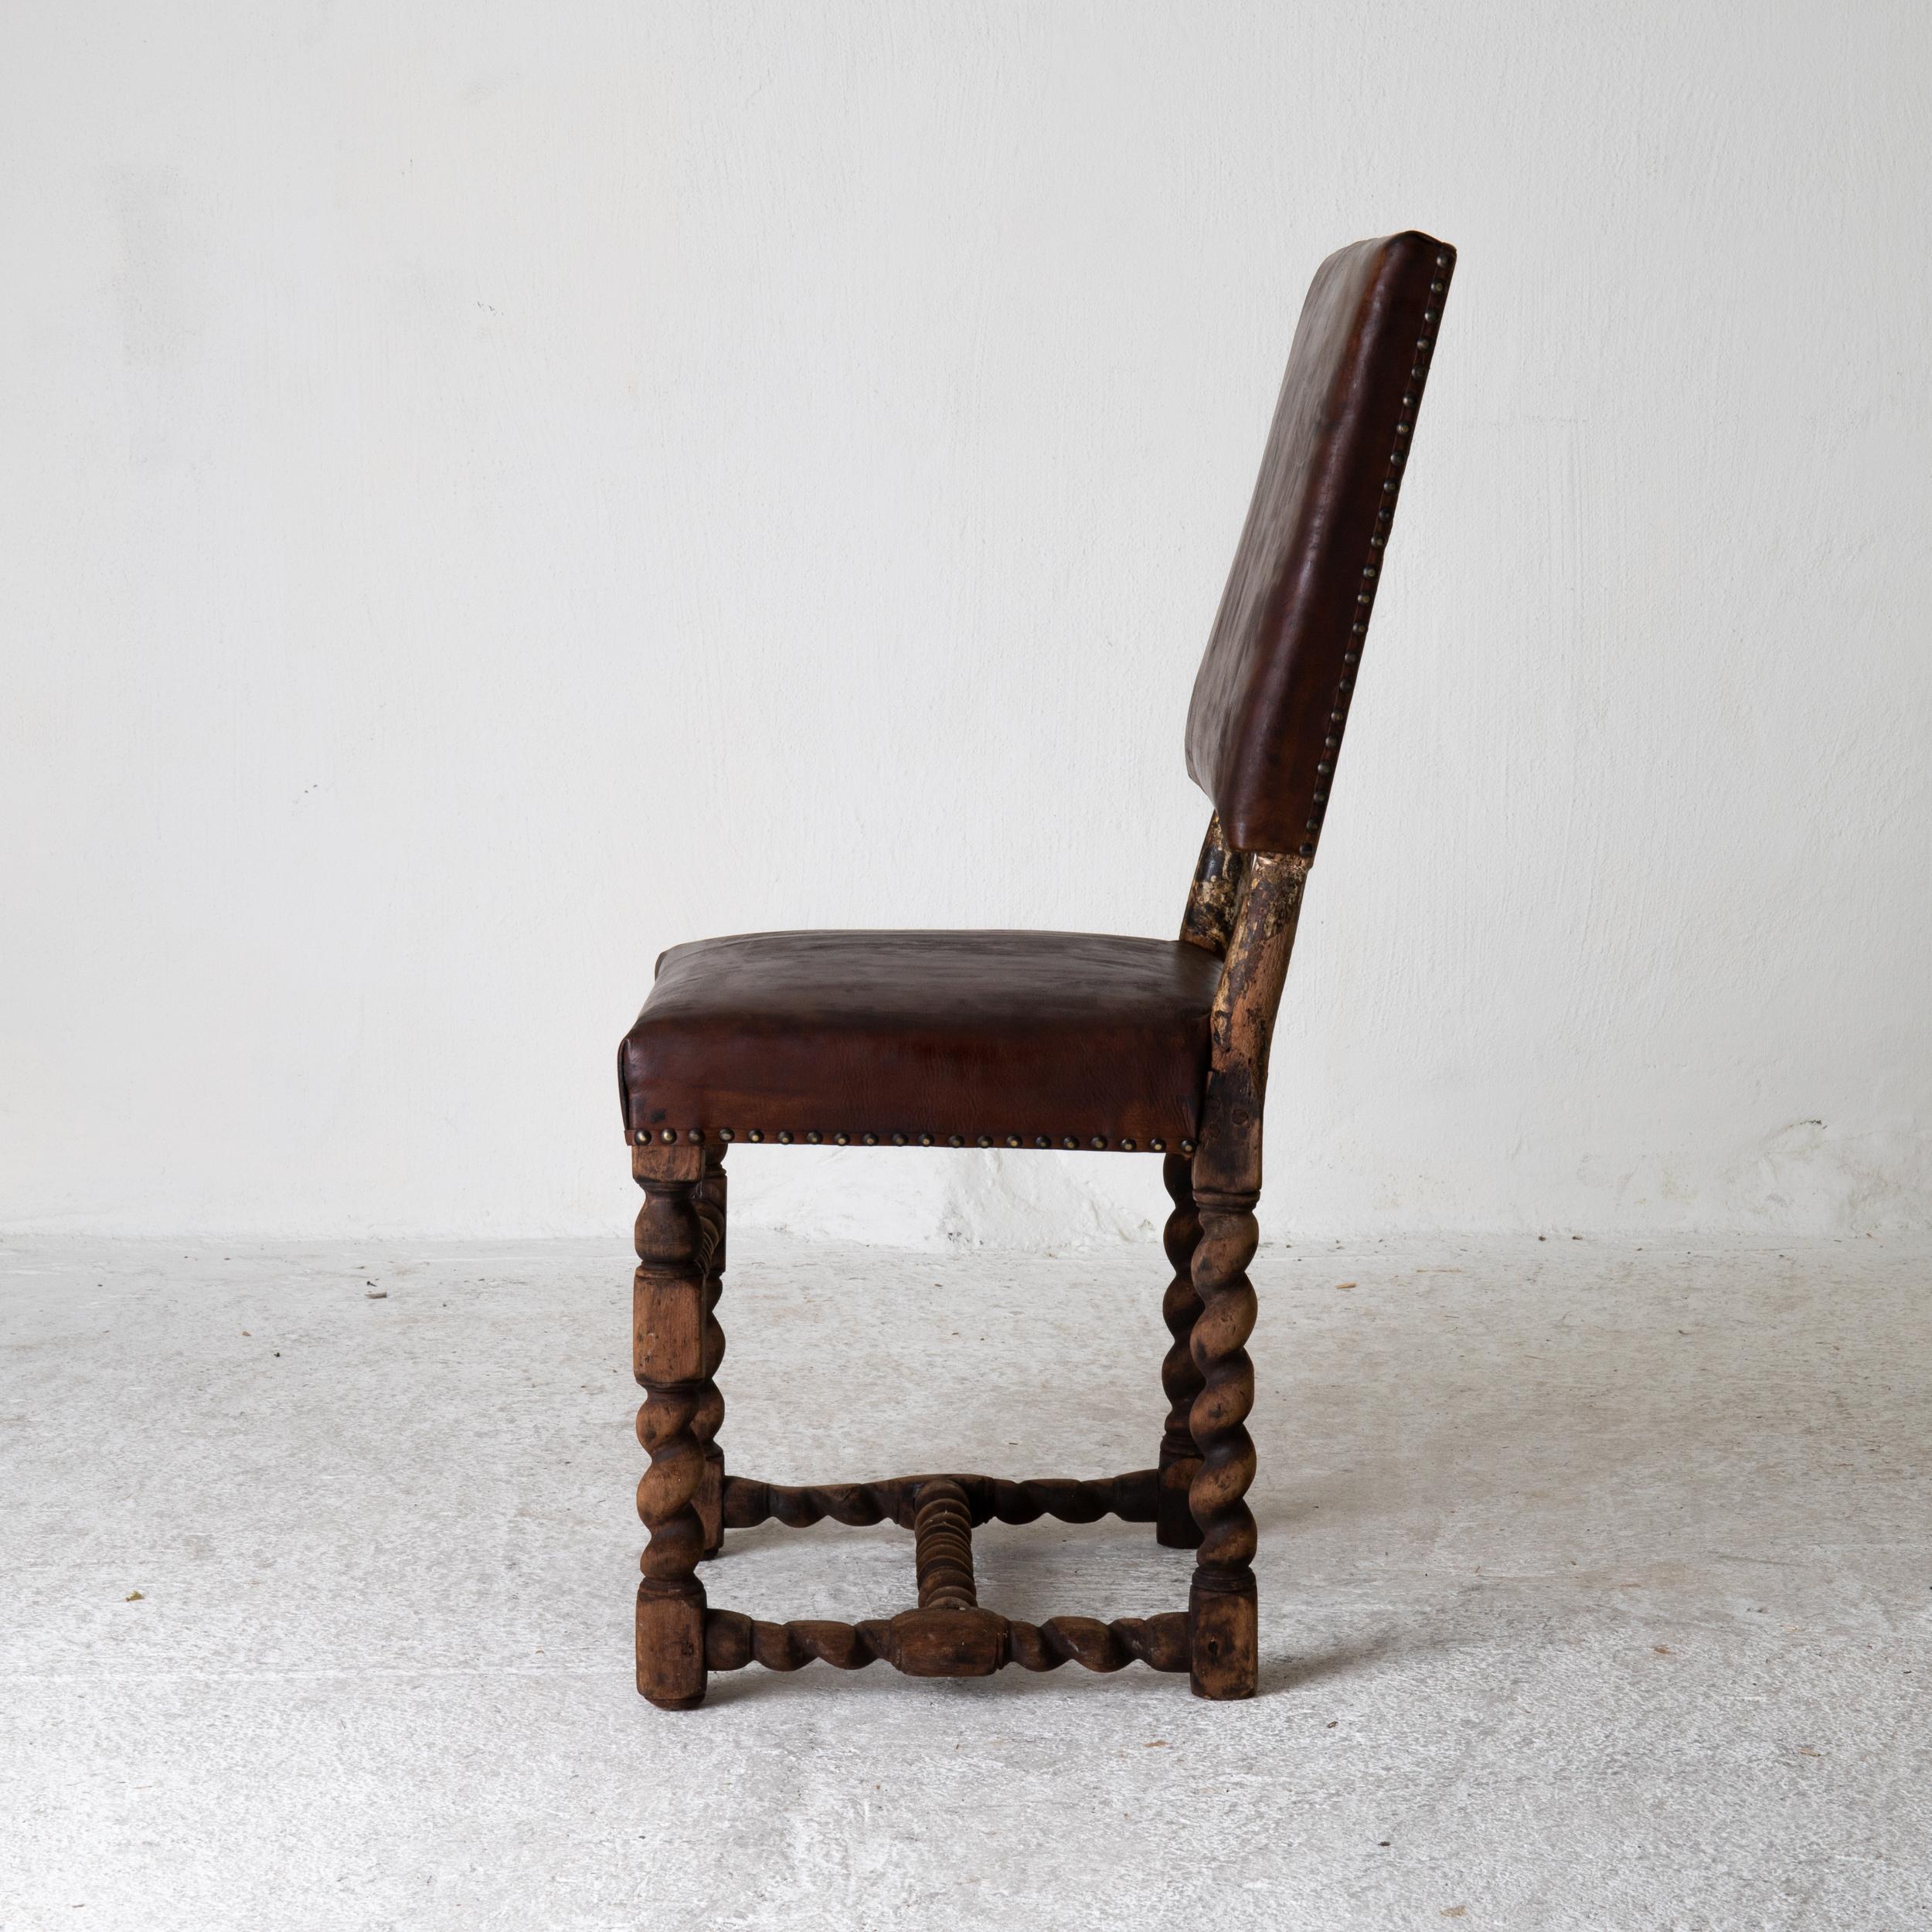 Chair side Swedish Baroque 1650-1750 brown leather Sweden. A side chair made during the Baroque period 1650-1750 in Sweden. Frame in unfinished oak wood. Seat and back upholstered in waxed vintage leather in brown.